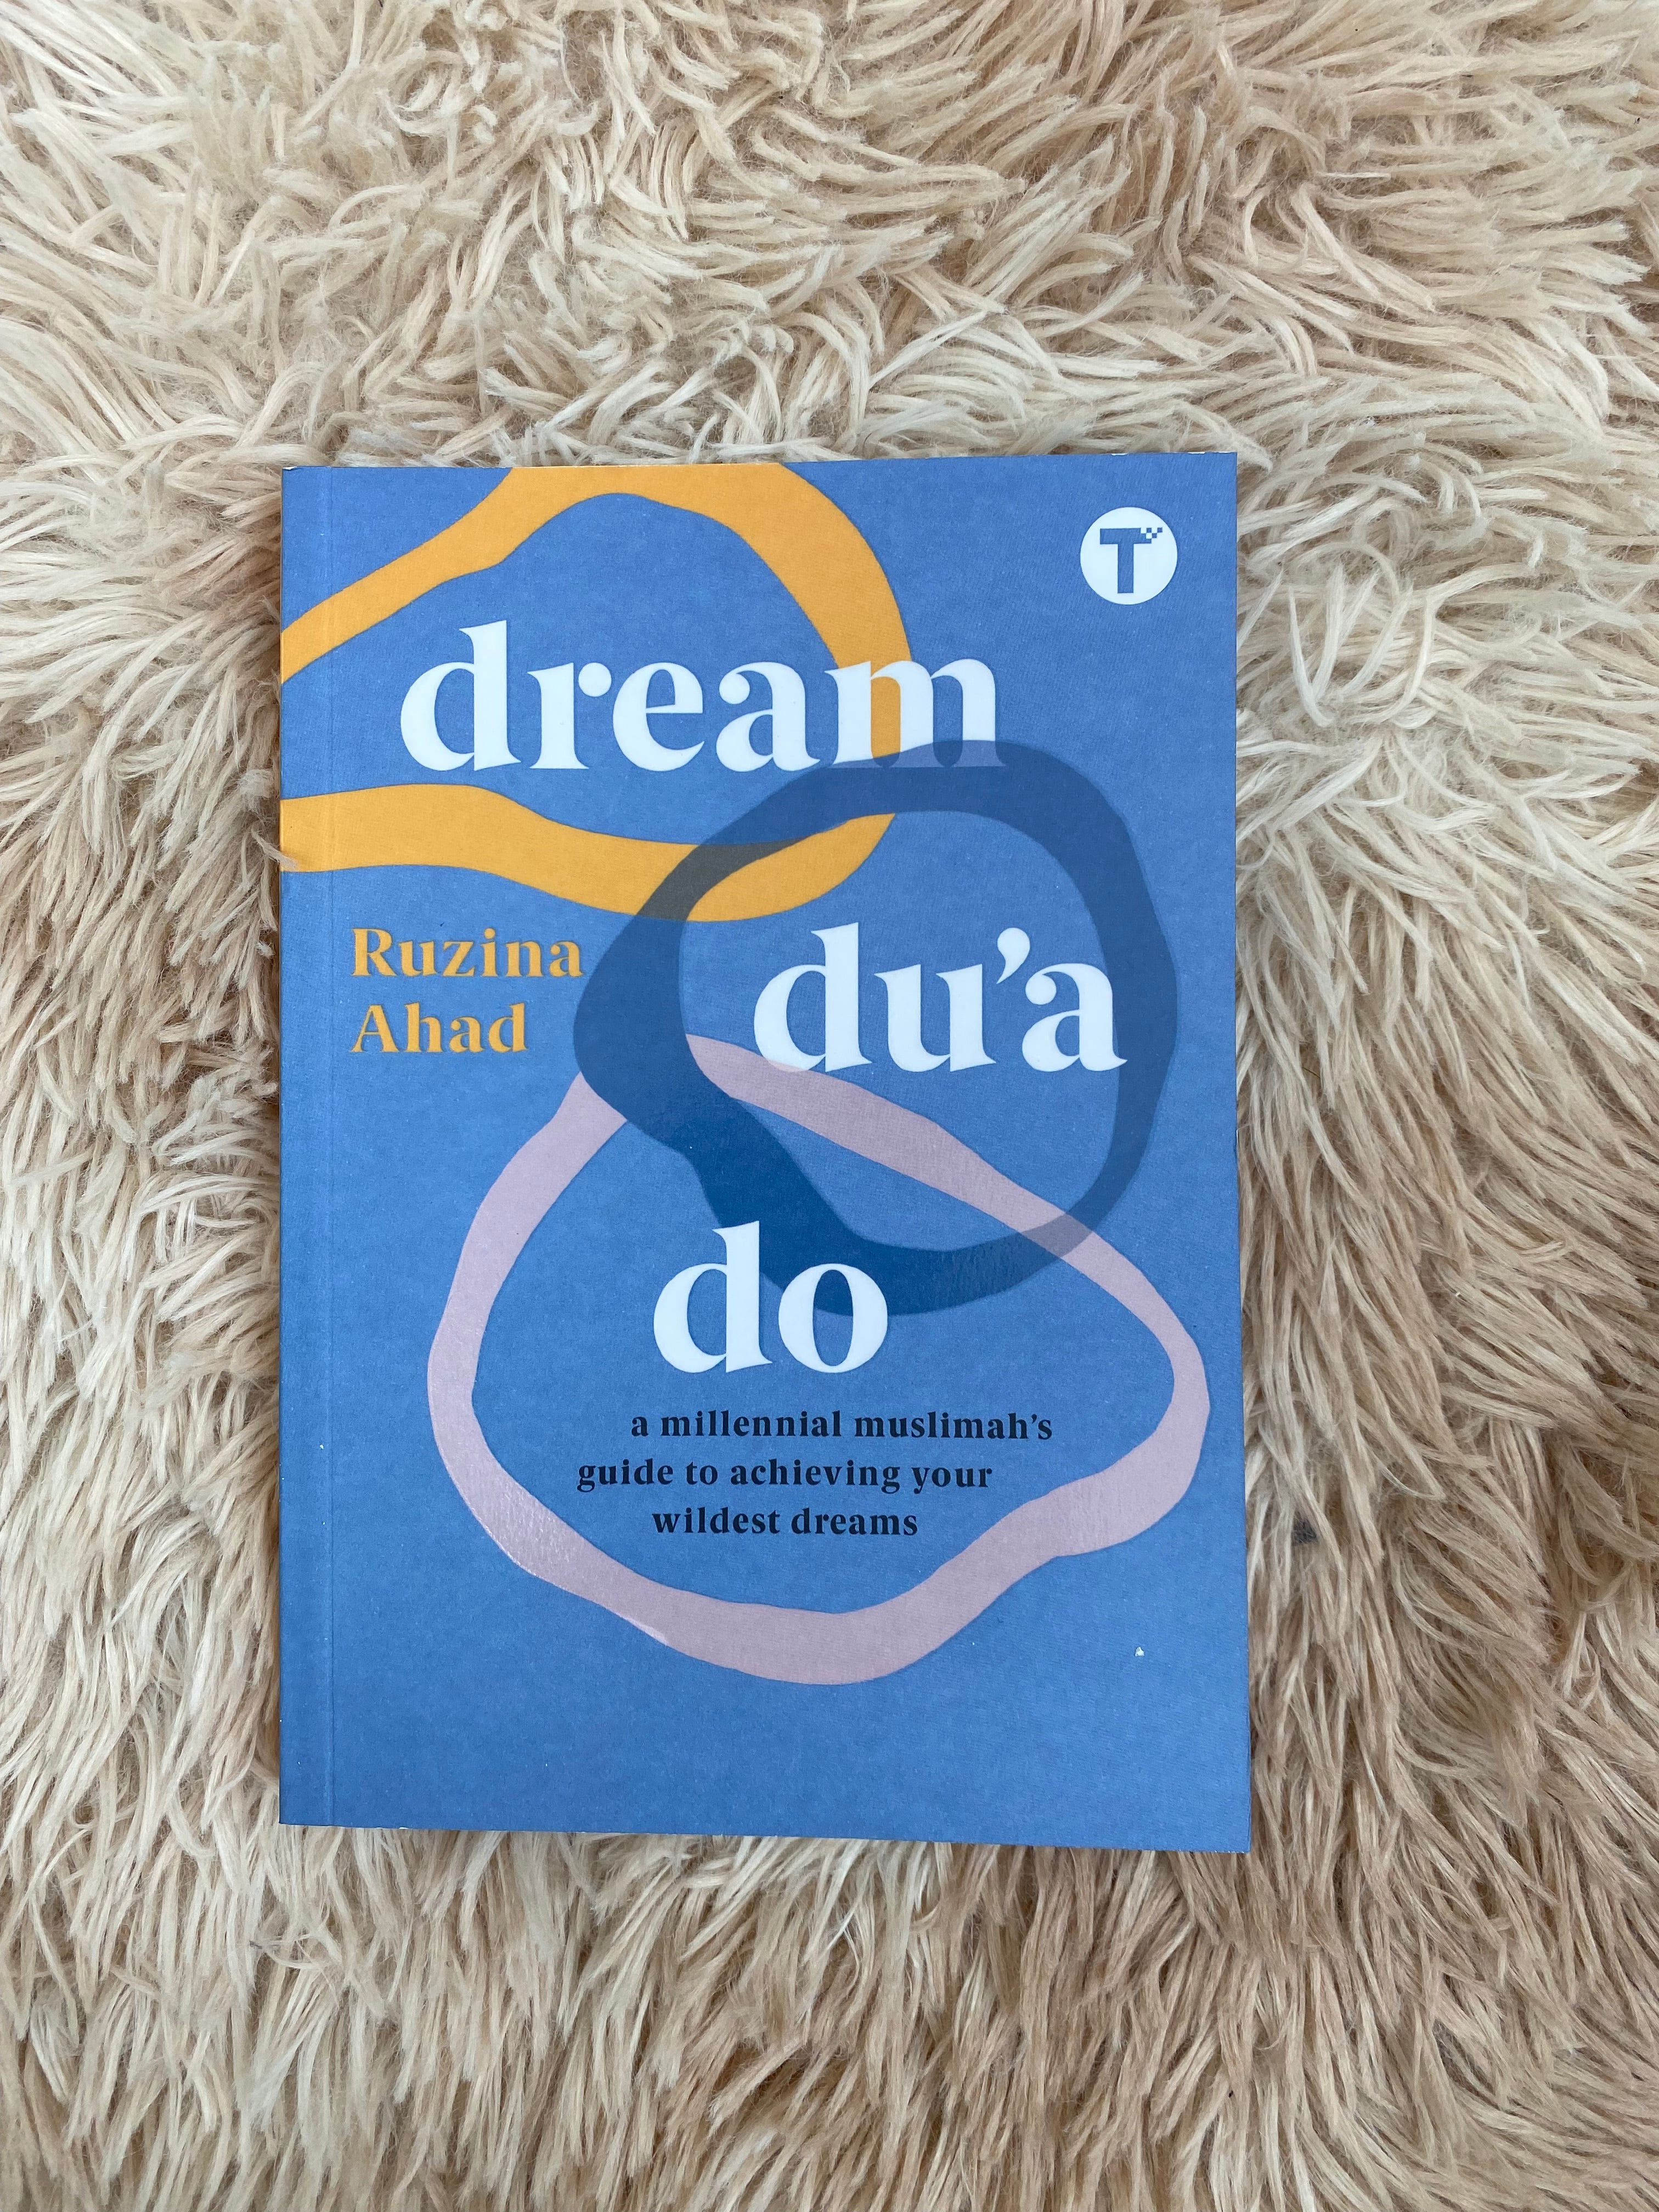 Tertib Publishing Book Dream Du'a Do: Millennial Muslimah’s Guide to Achieving Your Wildest Dreams by Ruzina Ahad 201297